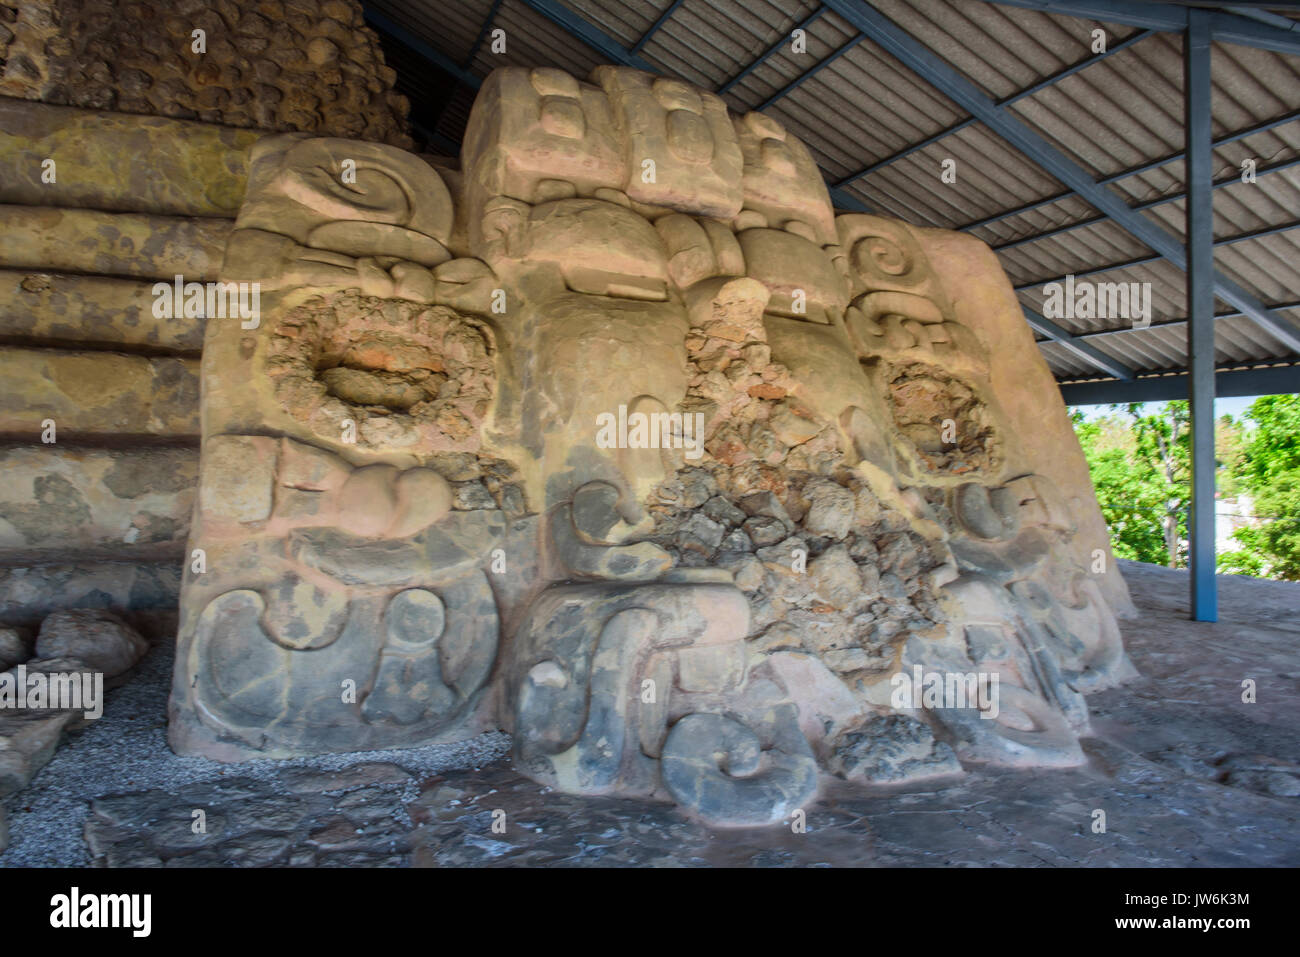 Carved masks in the Acanceh archeological site, Acanceh, Yucatan state, Mexico Stock Photo